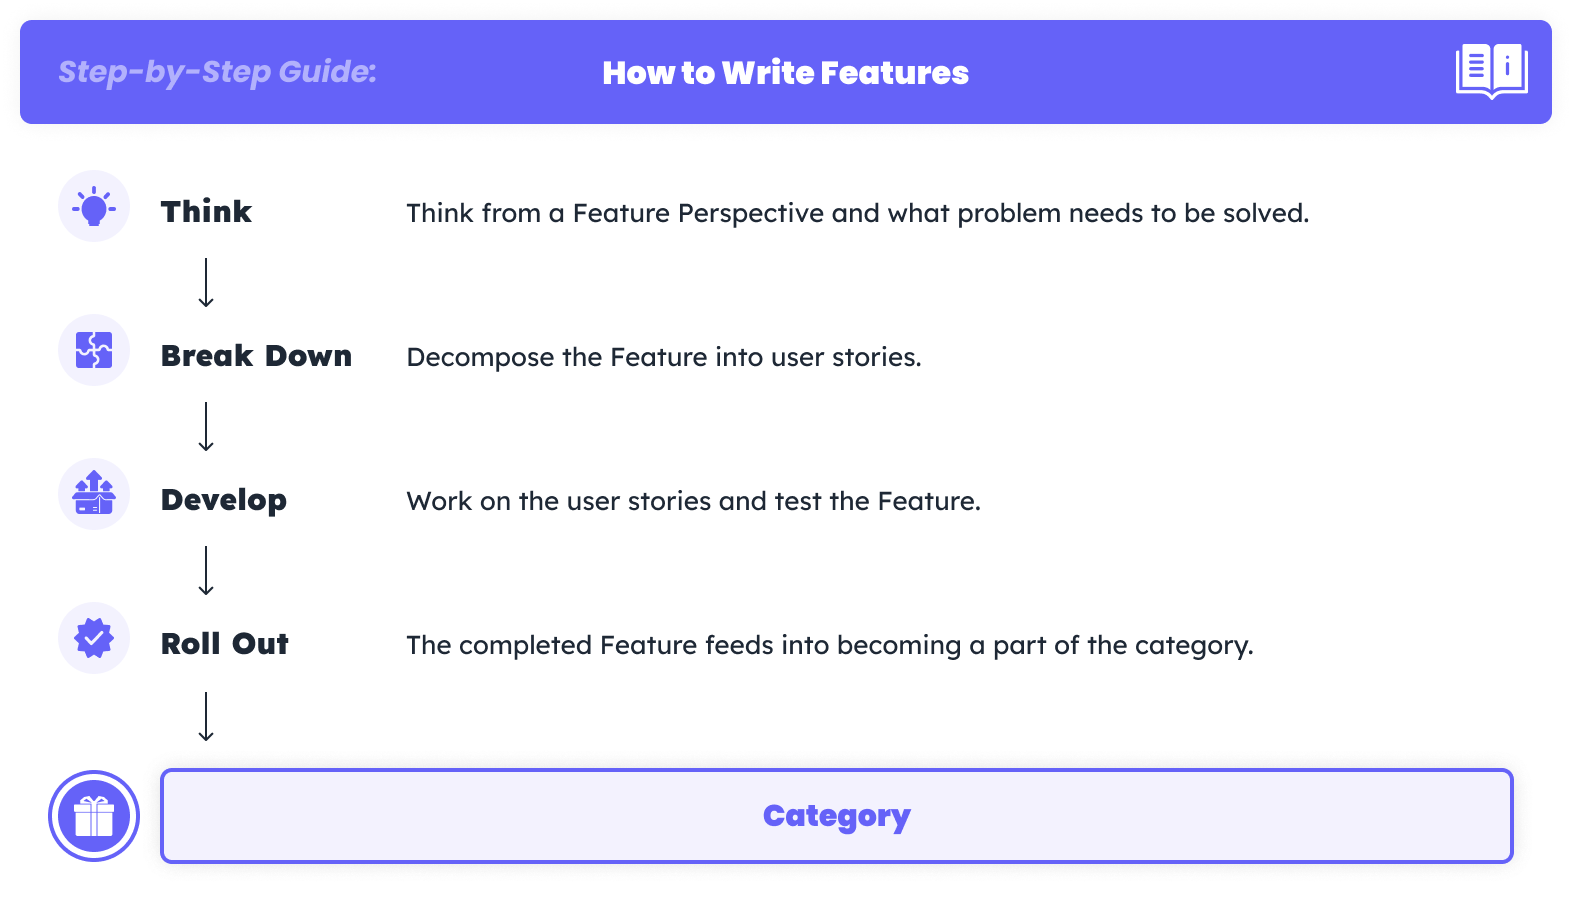 Breaking down features into user stories and feeding into the category